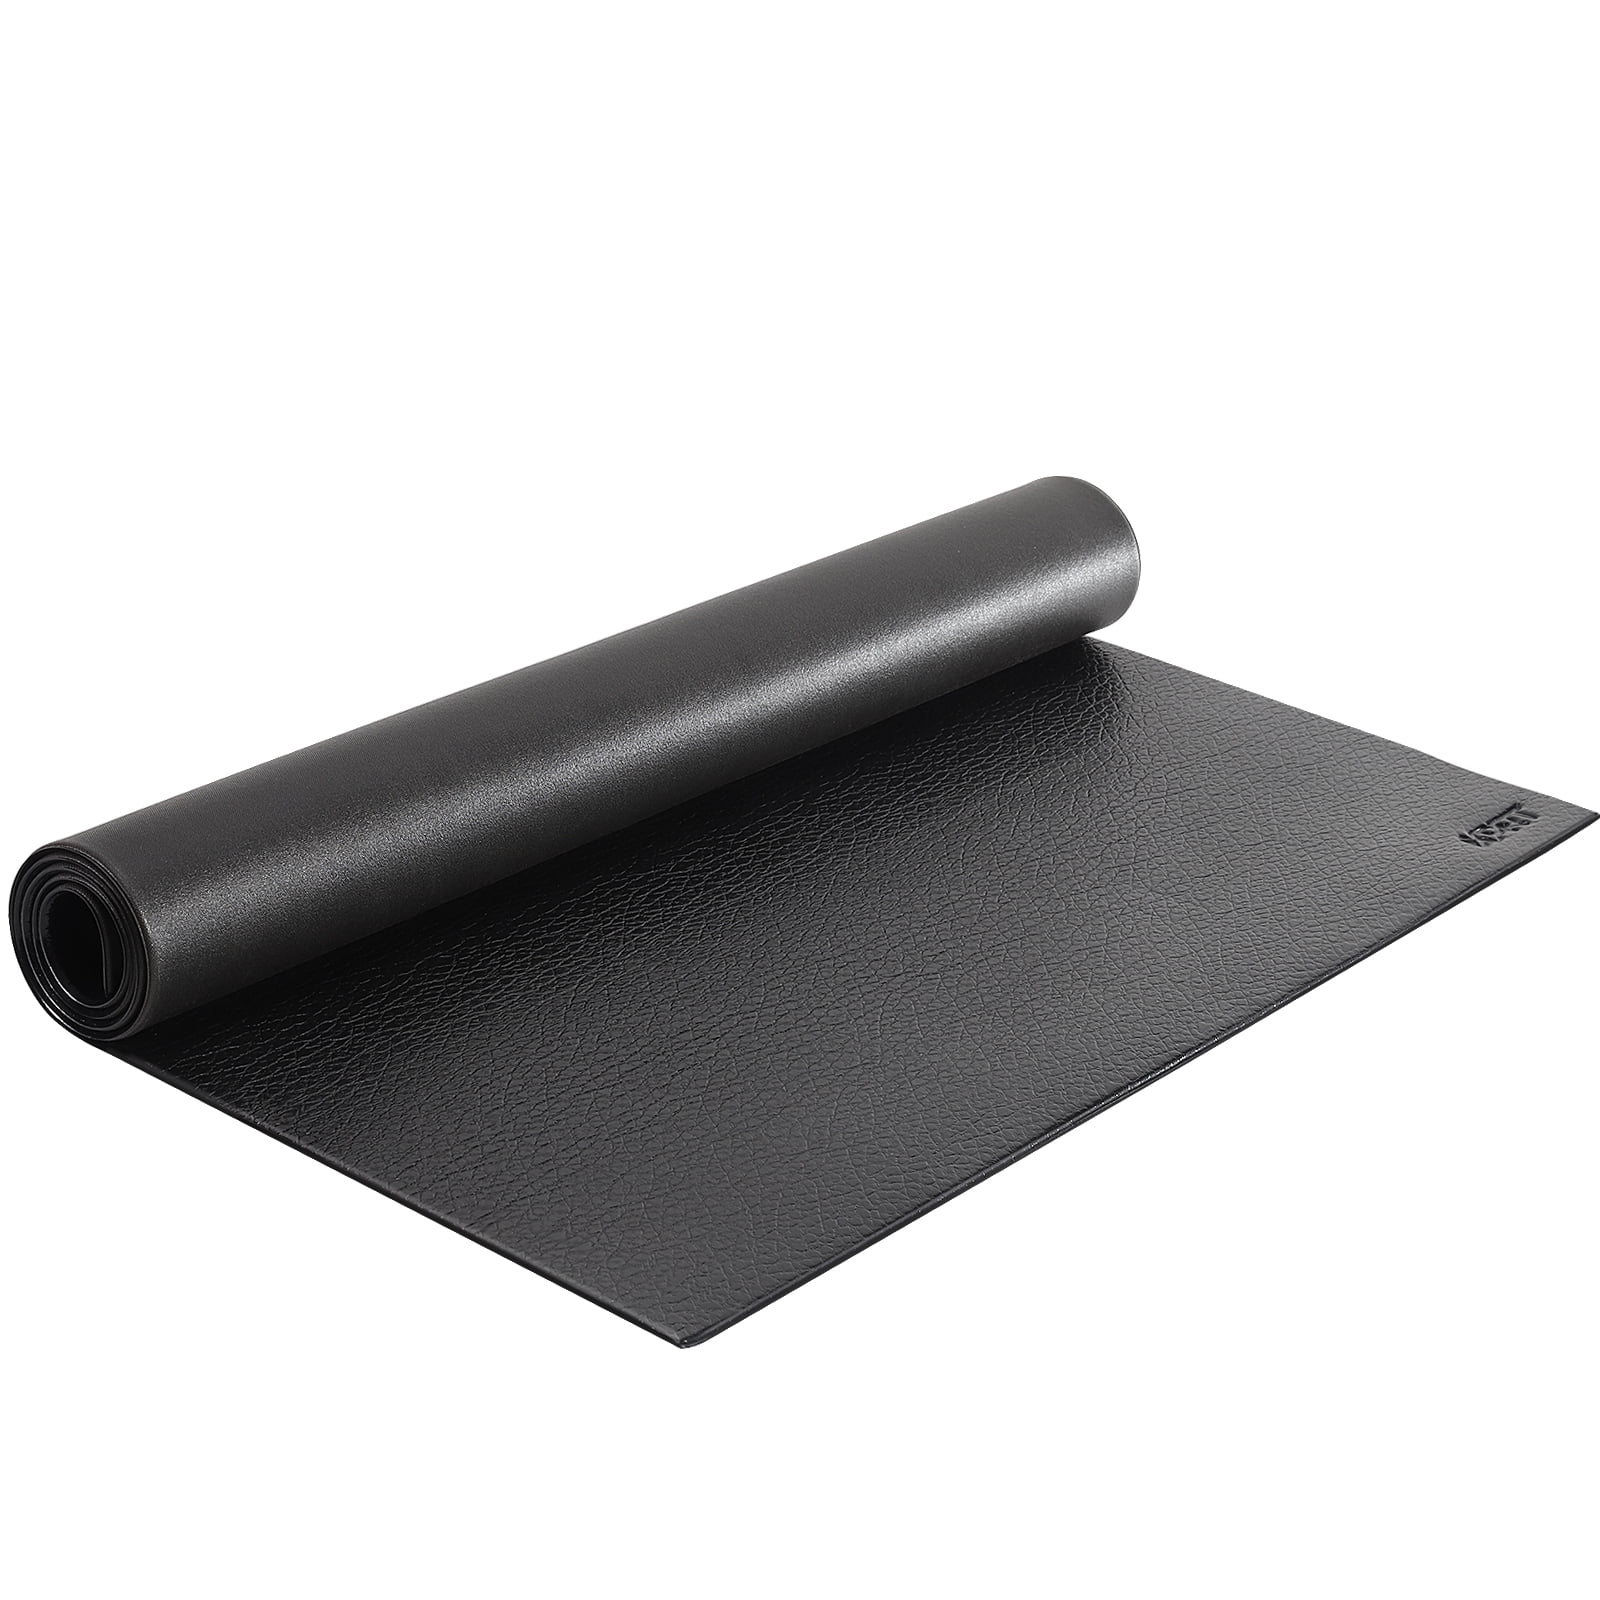 Details about   high-Density Exercise Mat Gym Bike Treadmill Mat PVC Indoor Yoga Train 2 Size 